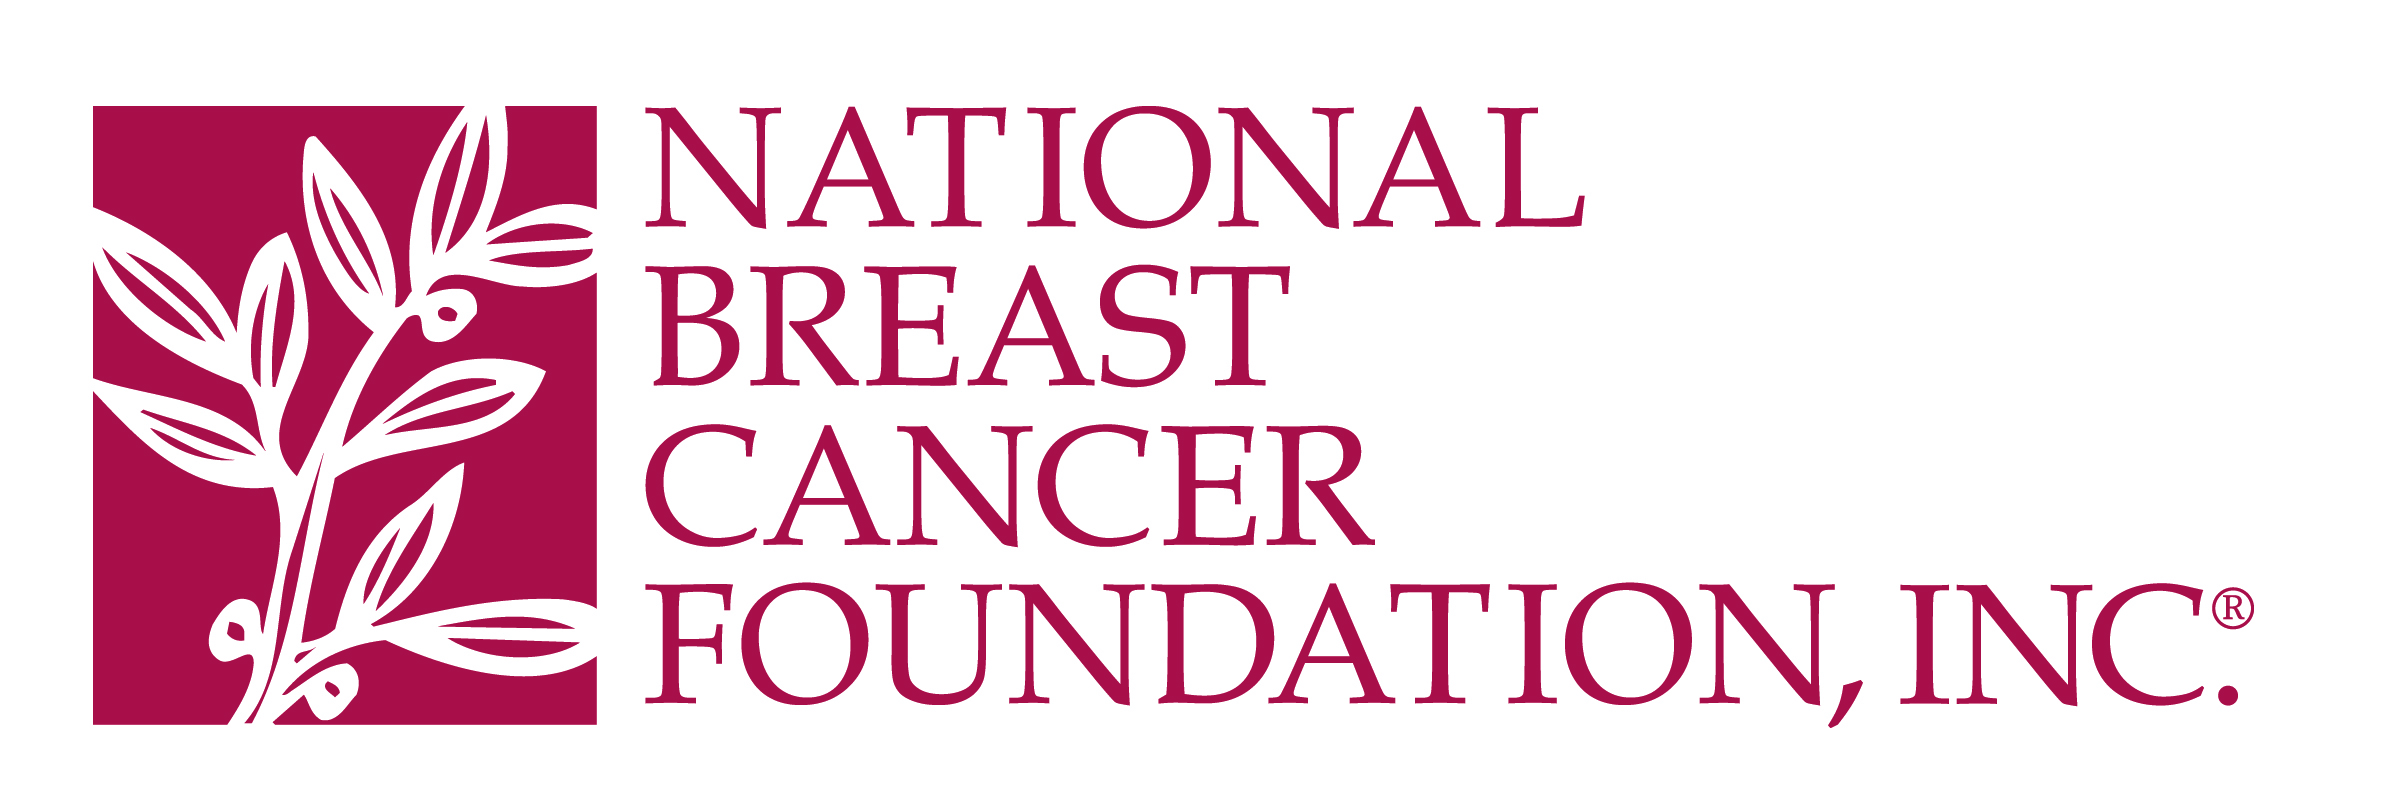 Image of - National Breast Cancer Foundation